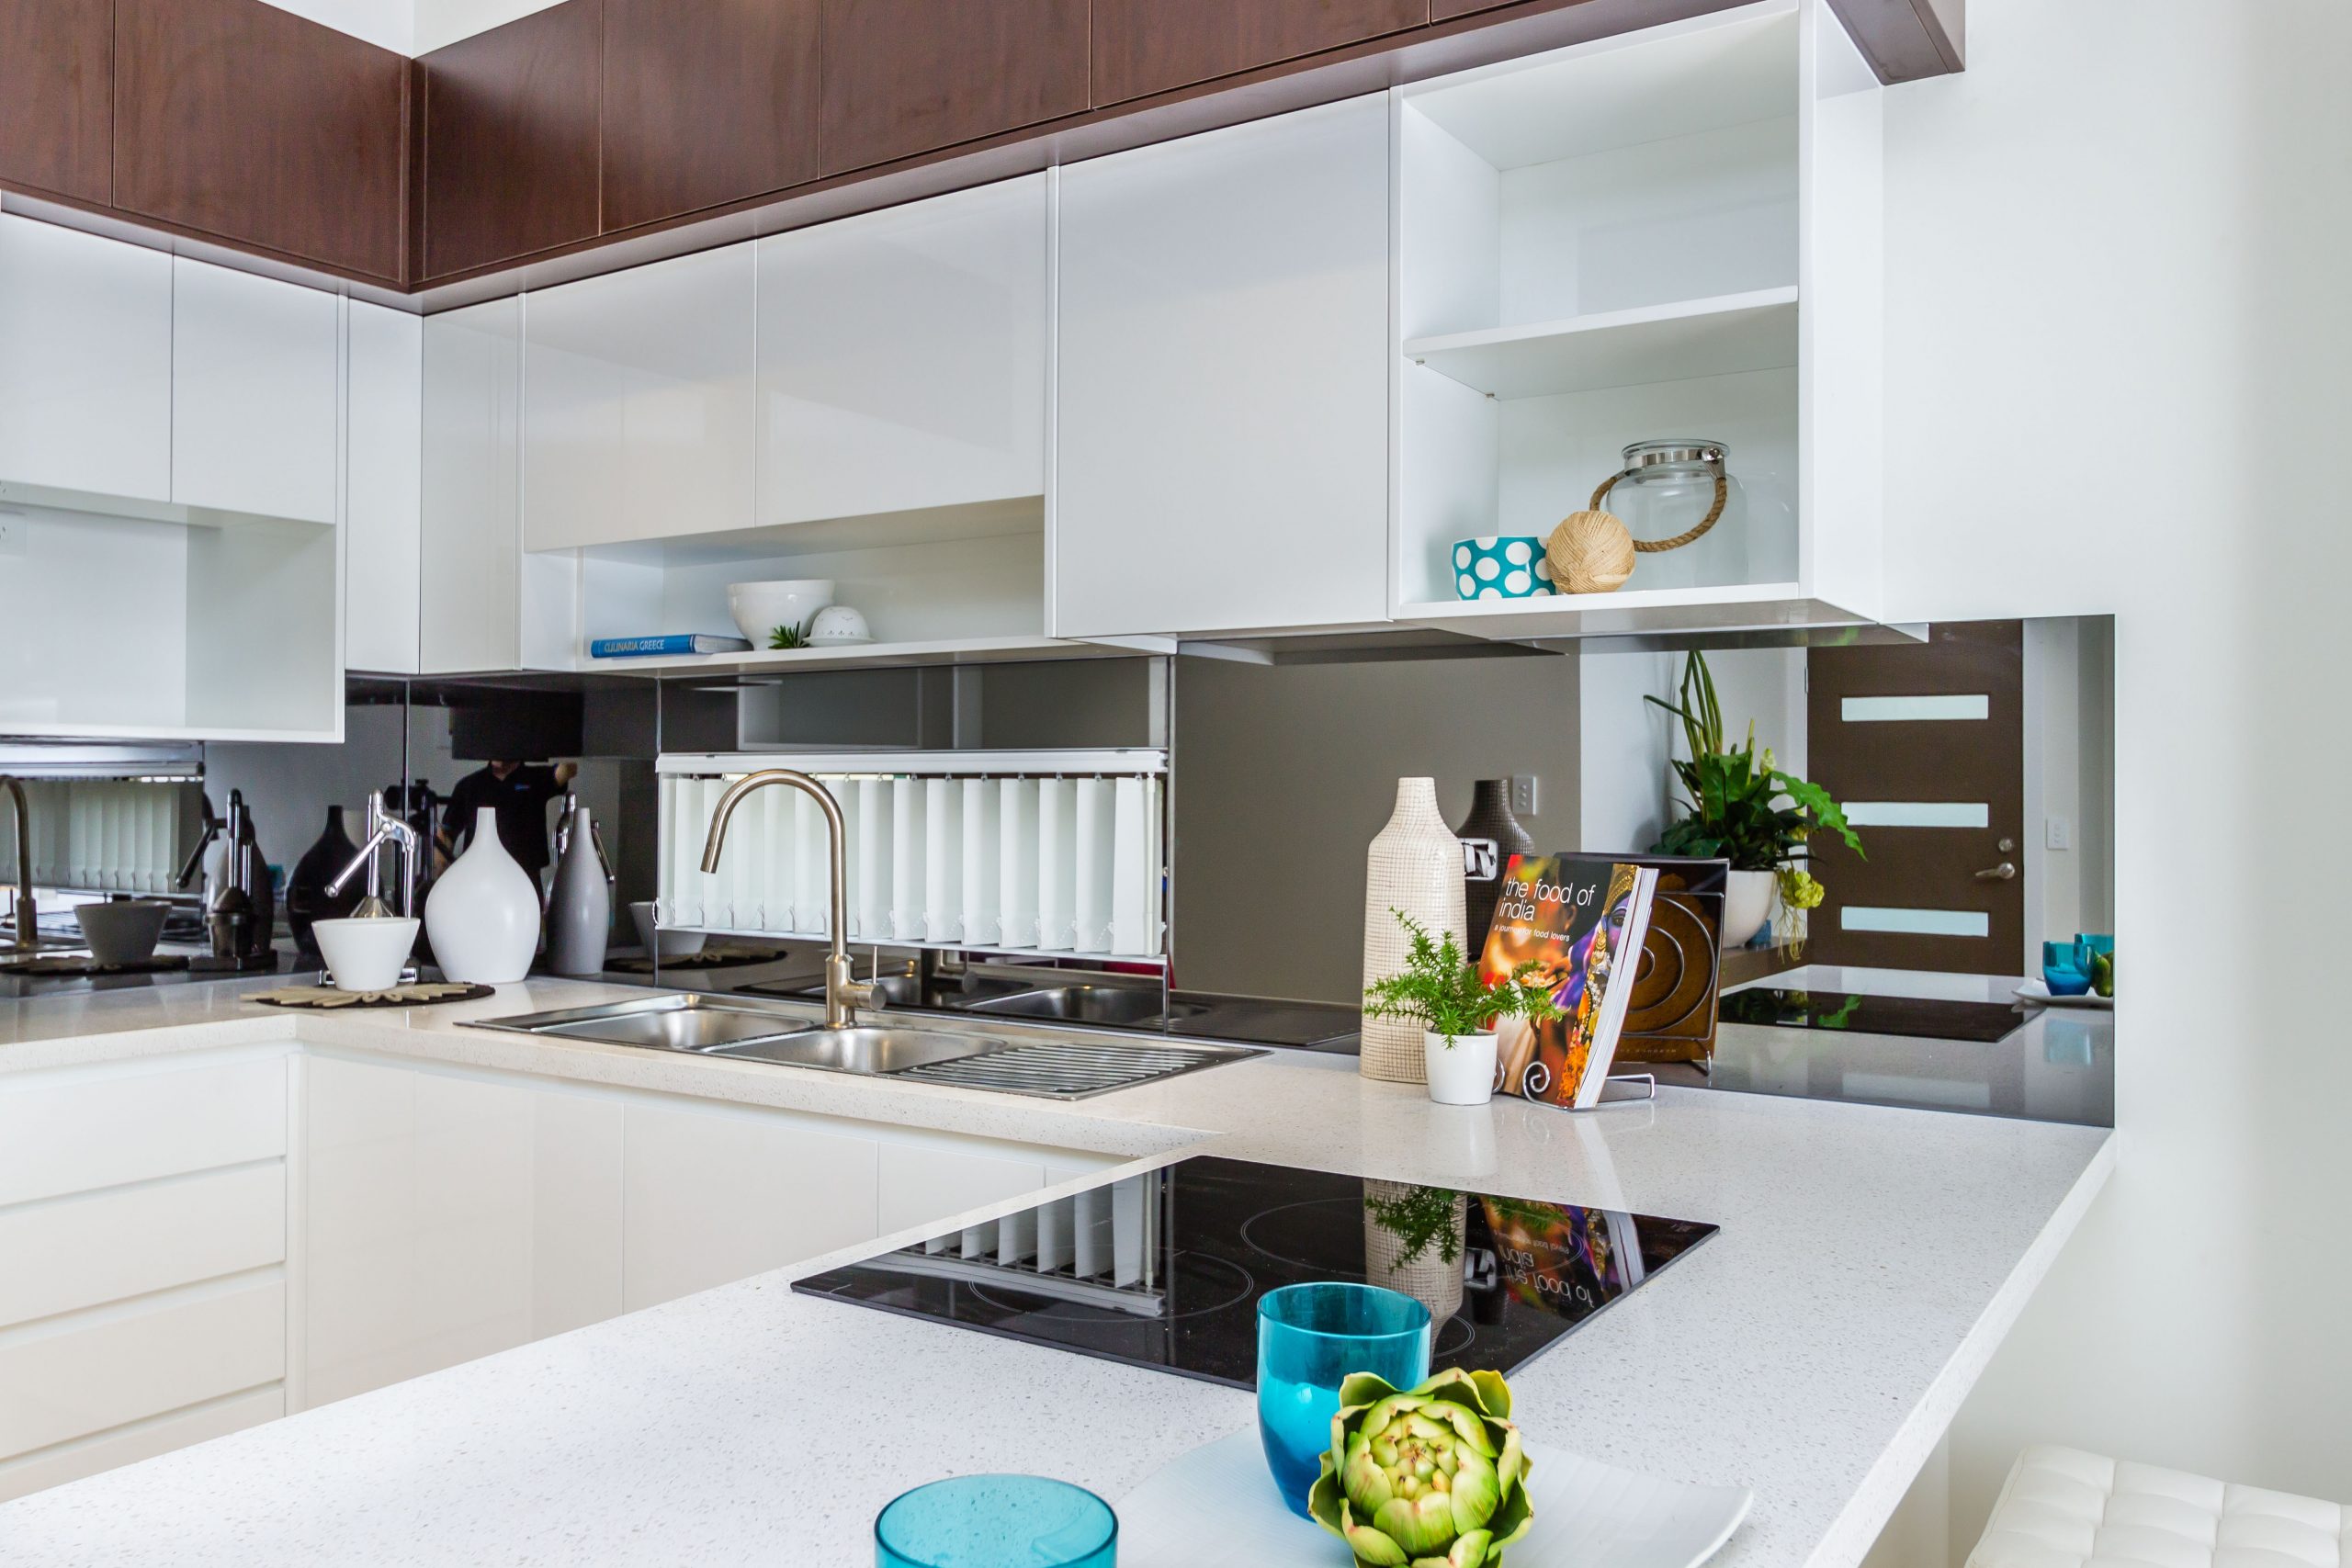 Make the most of the space in your Granny Flat kitchen